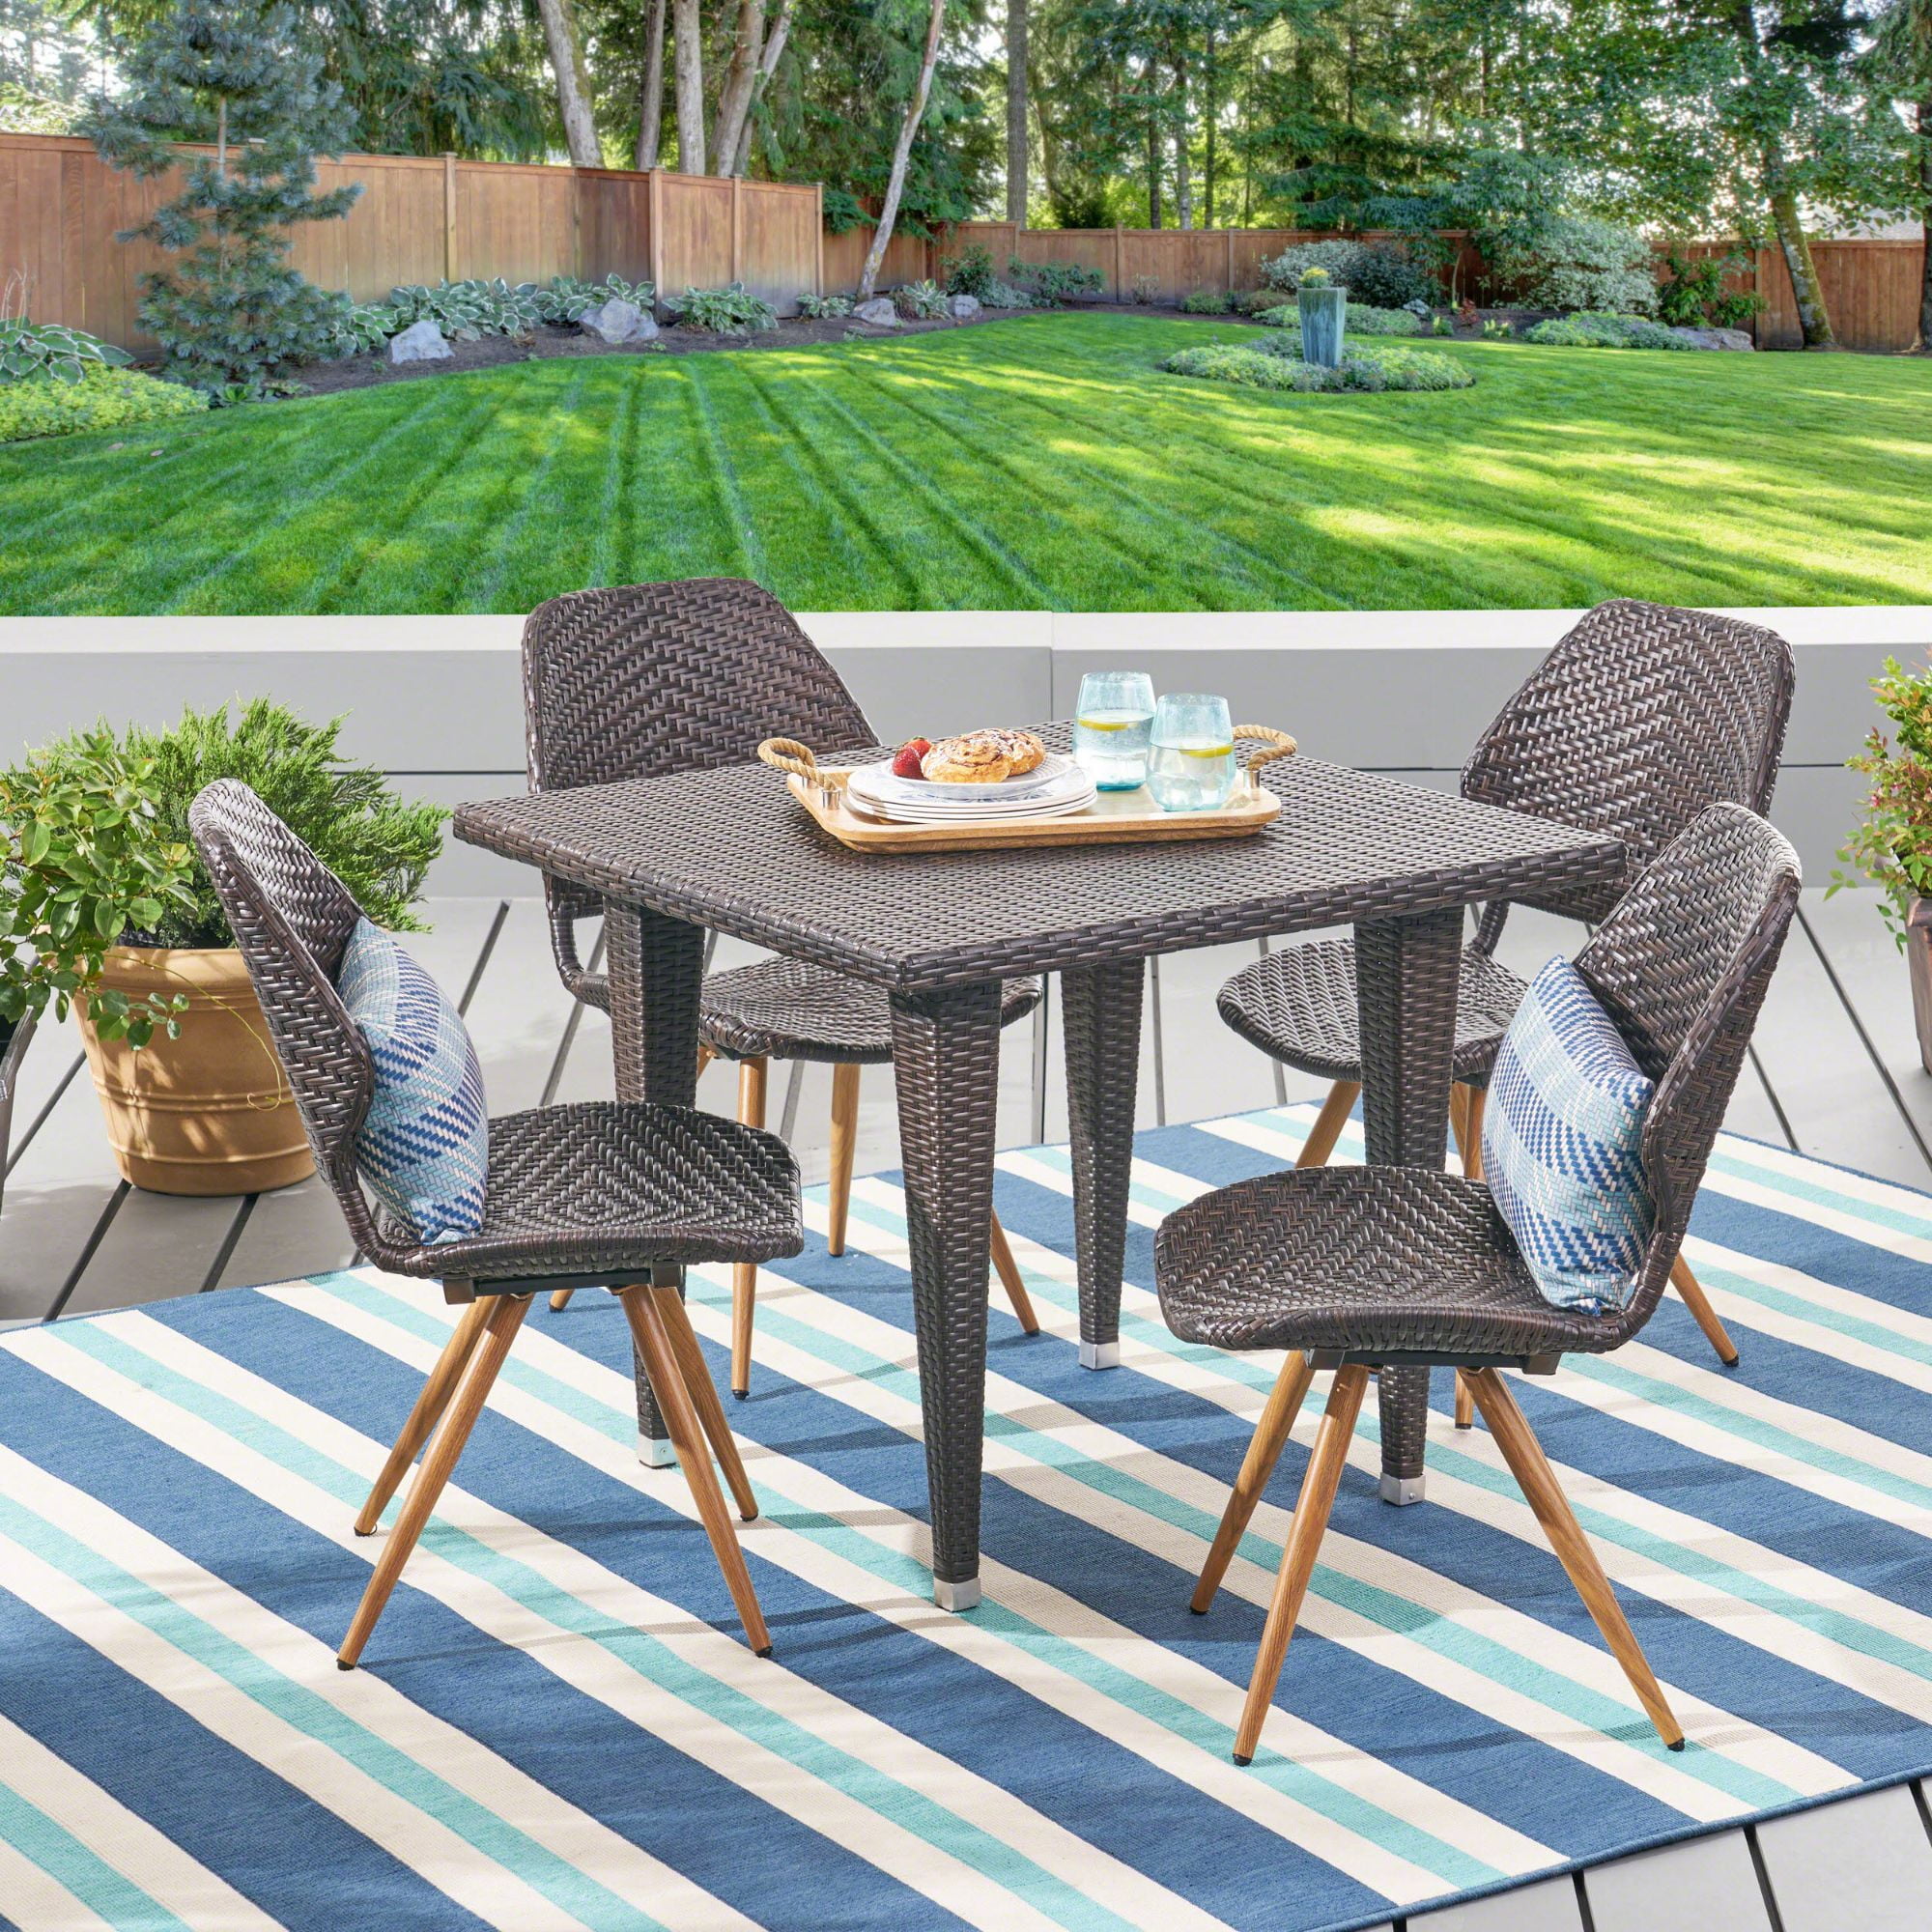 Comfortable Patio Dining Sets For Outdoor Entertaining